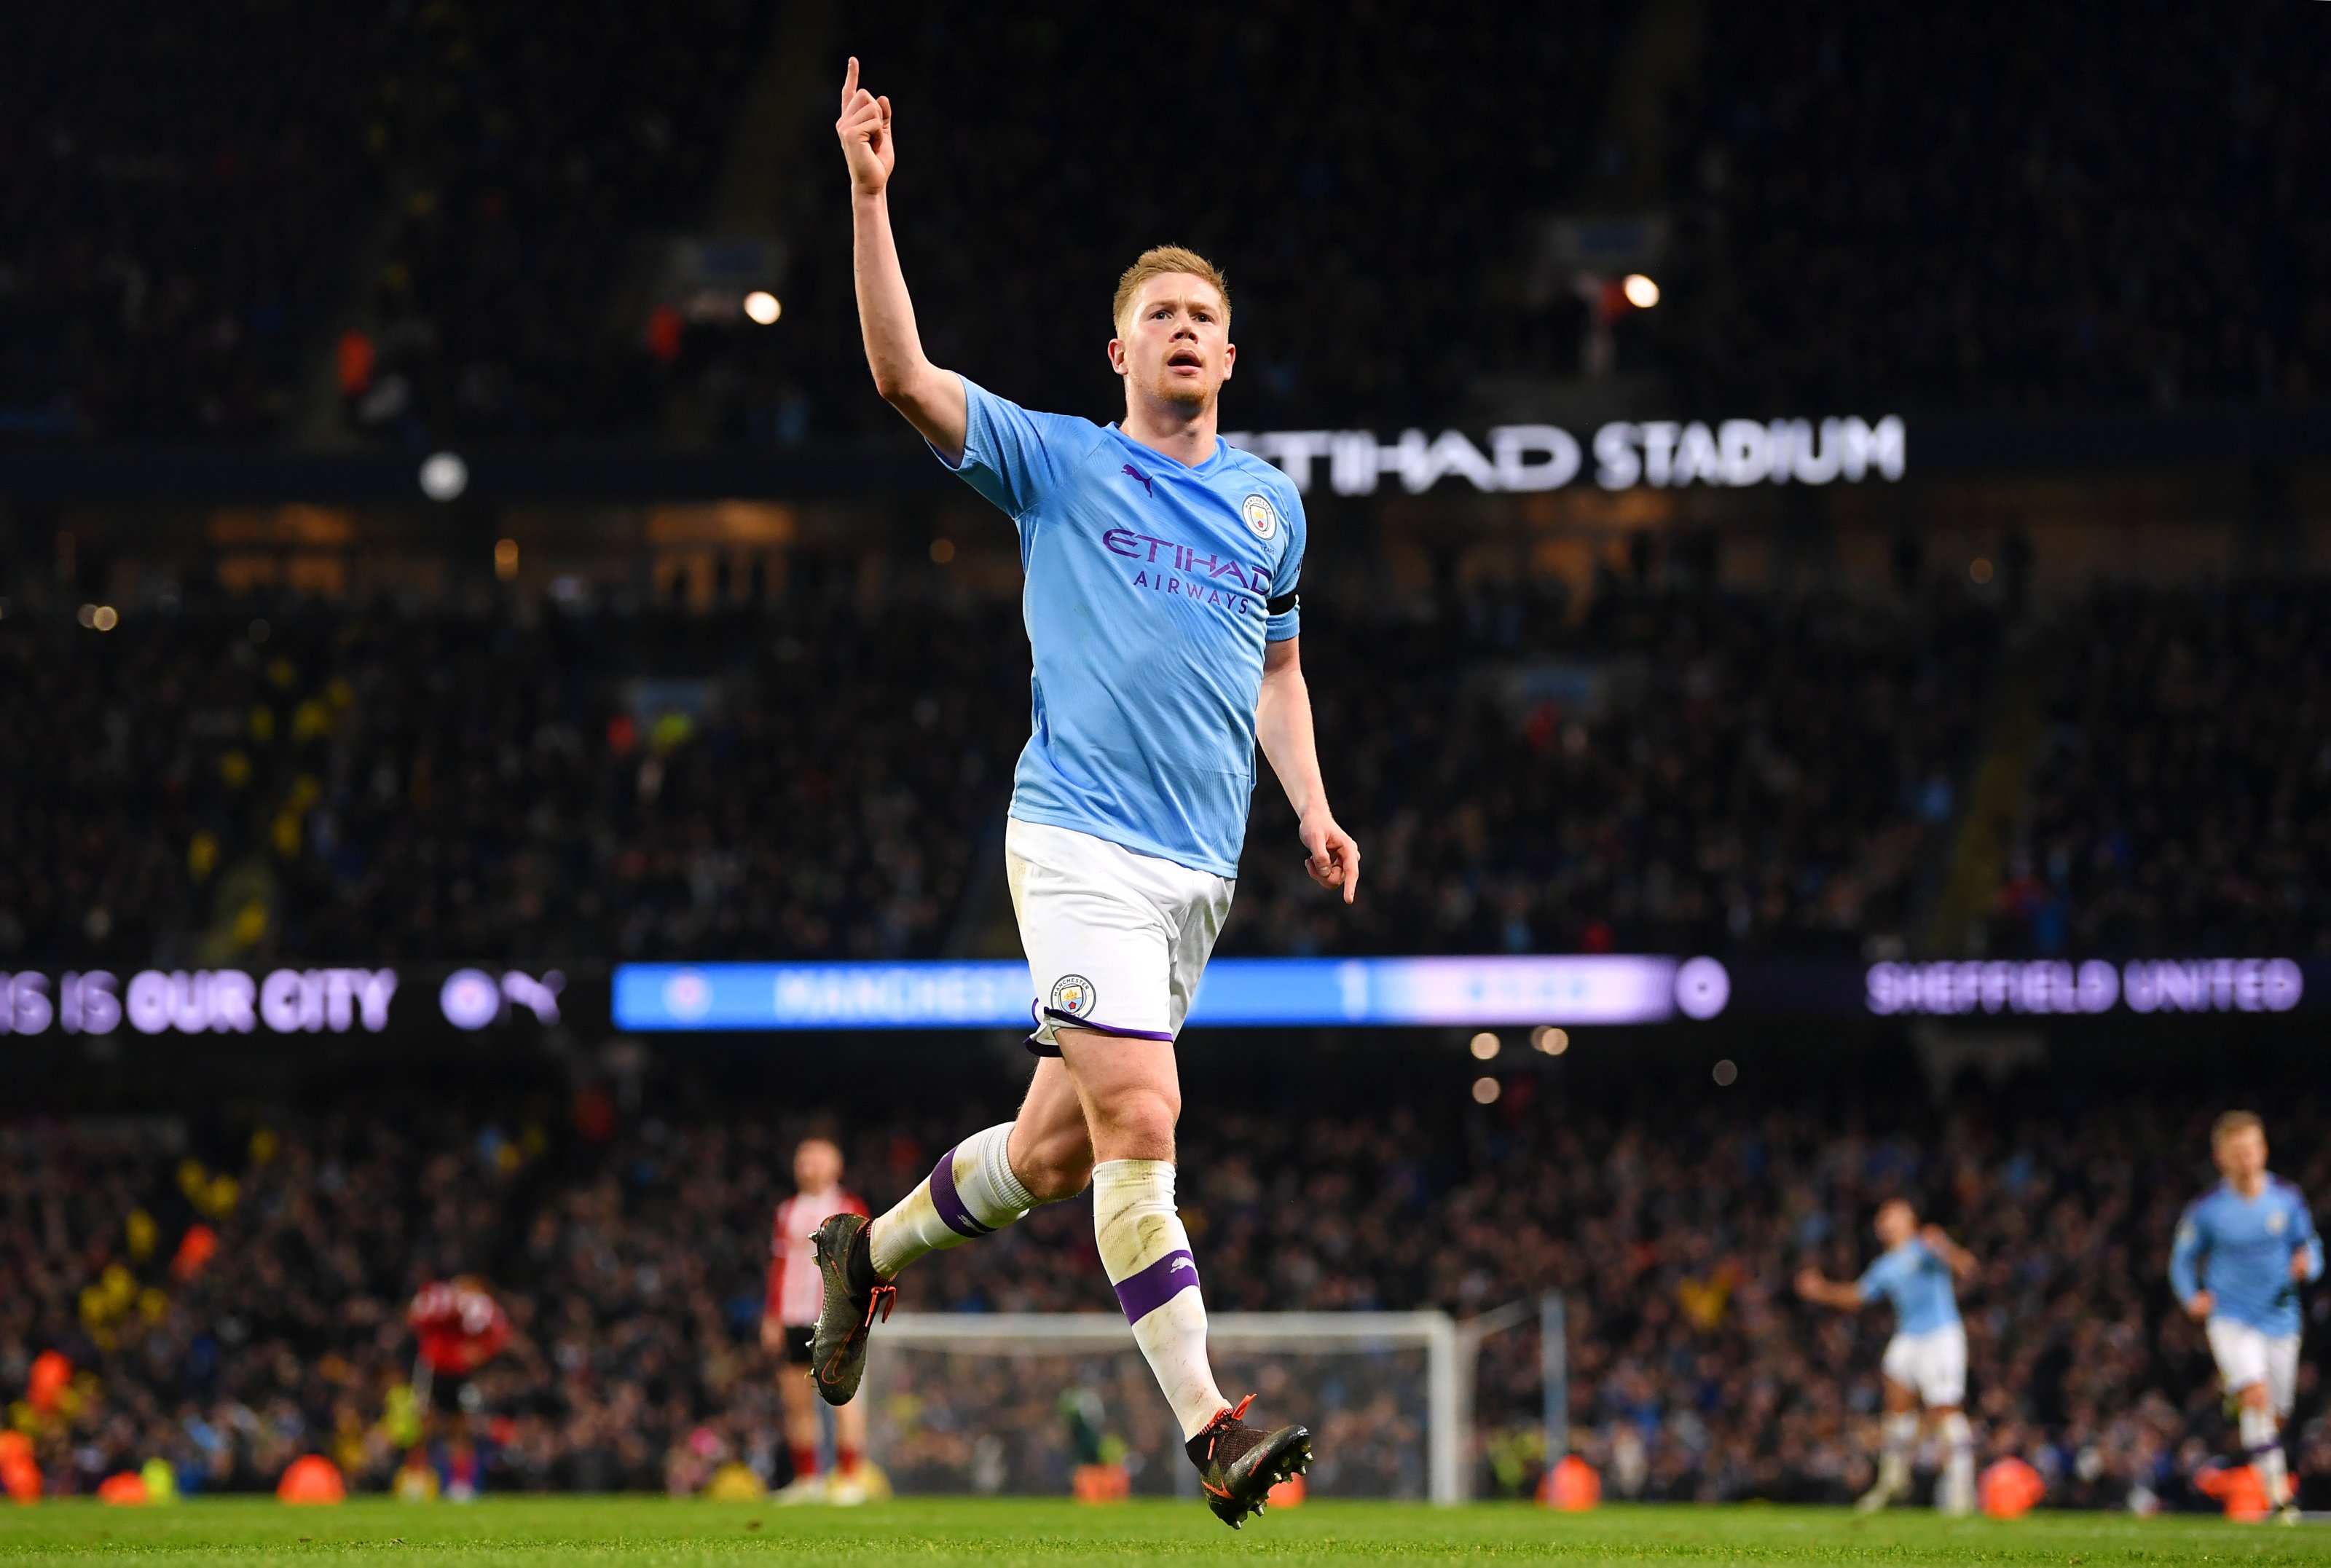 Barcelona must track Kevin de Bruyne as he wants to leave Manchester City